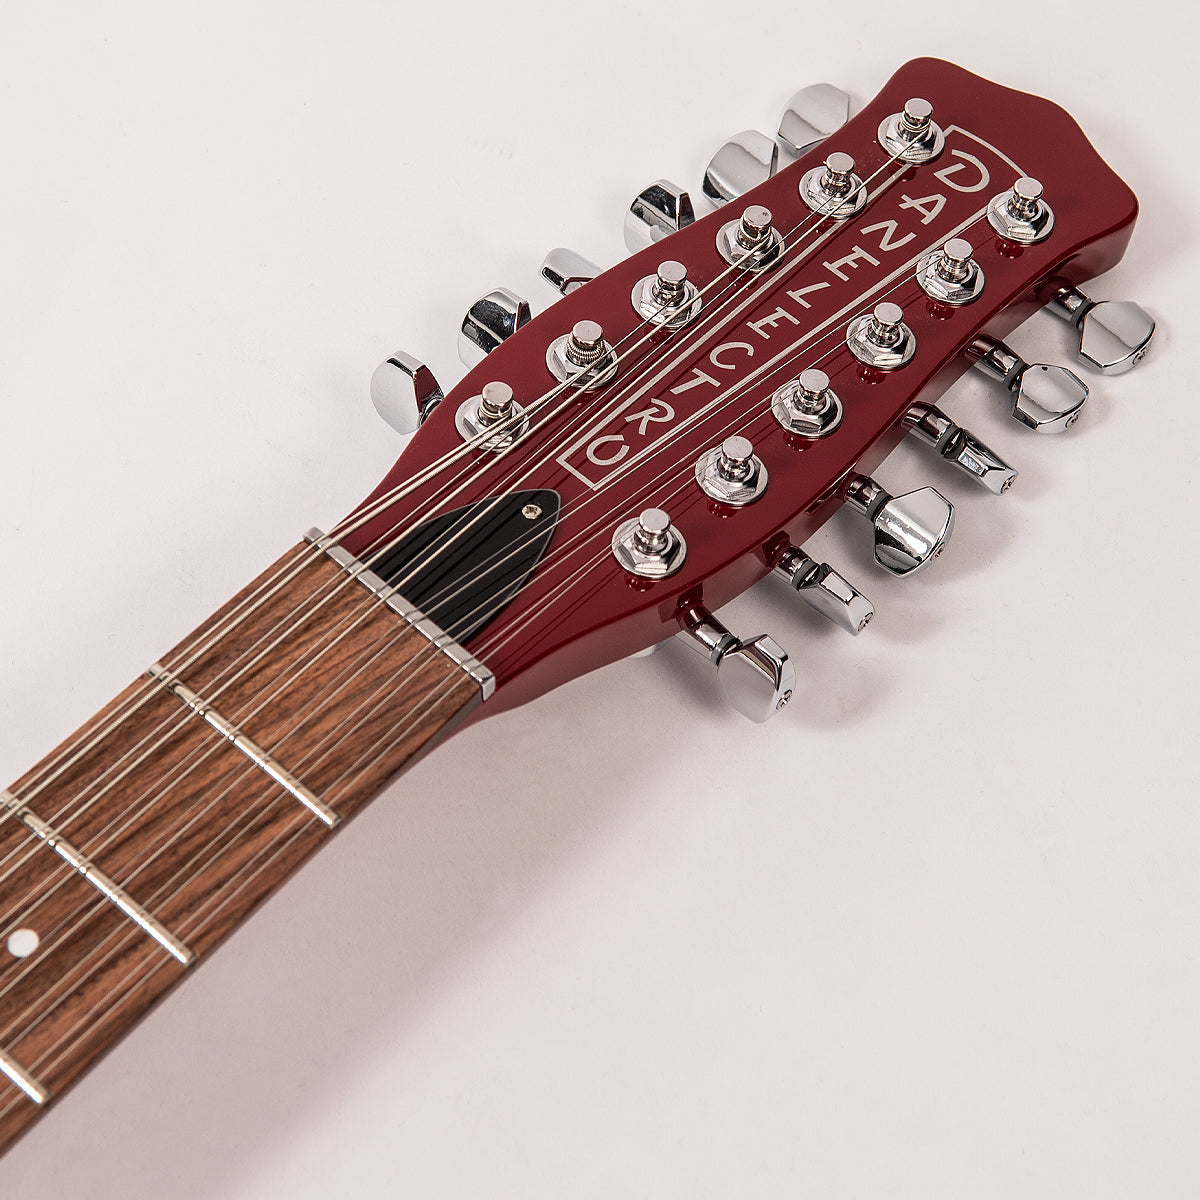 Danelectro '59 12 String Guitar ~ Red, 12 String Electric Guitars for sale at Richards Guitars.